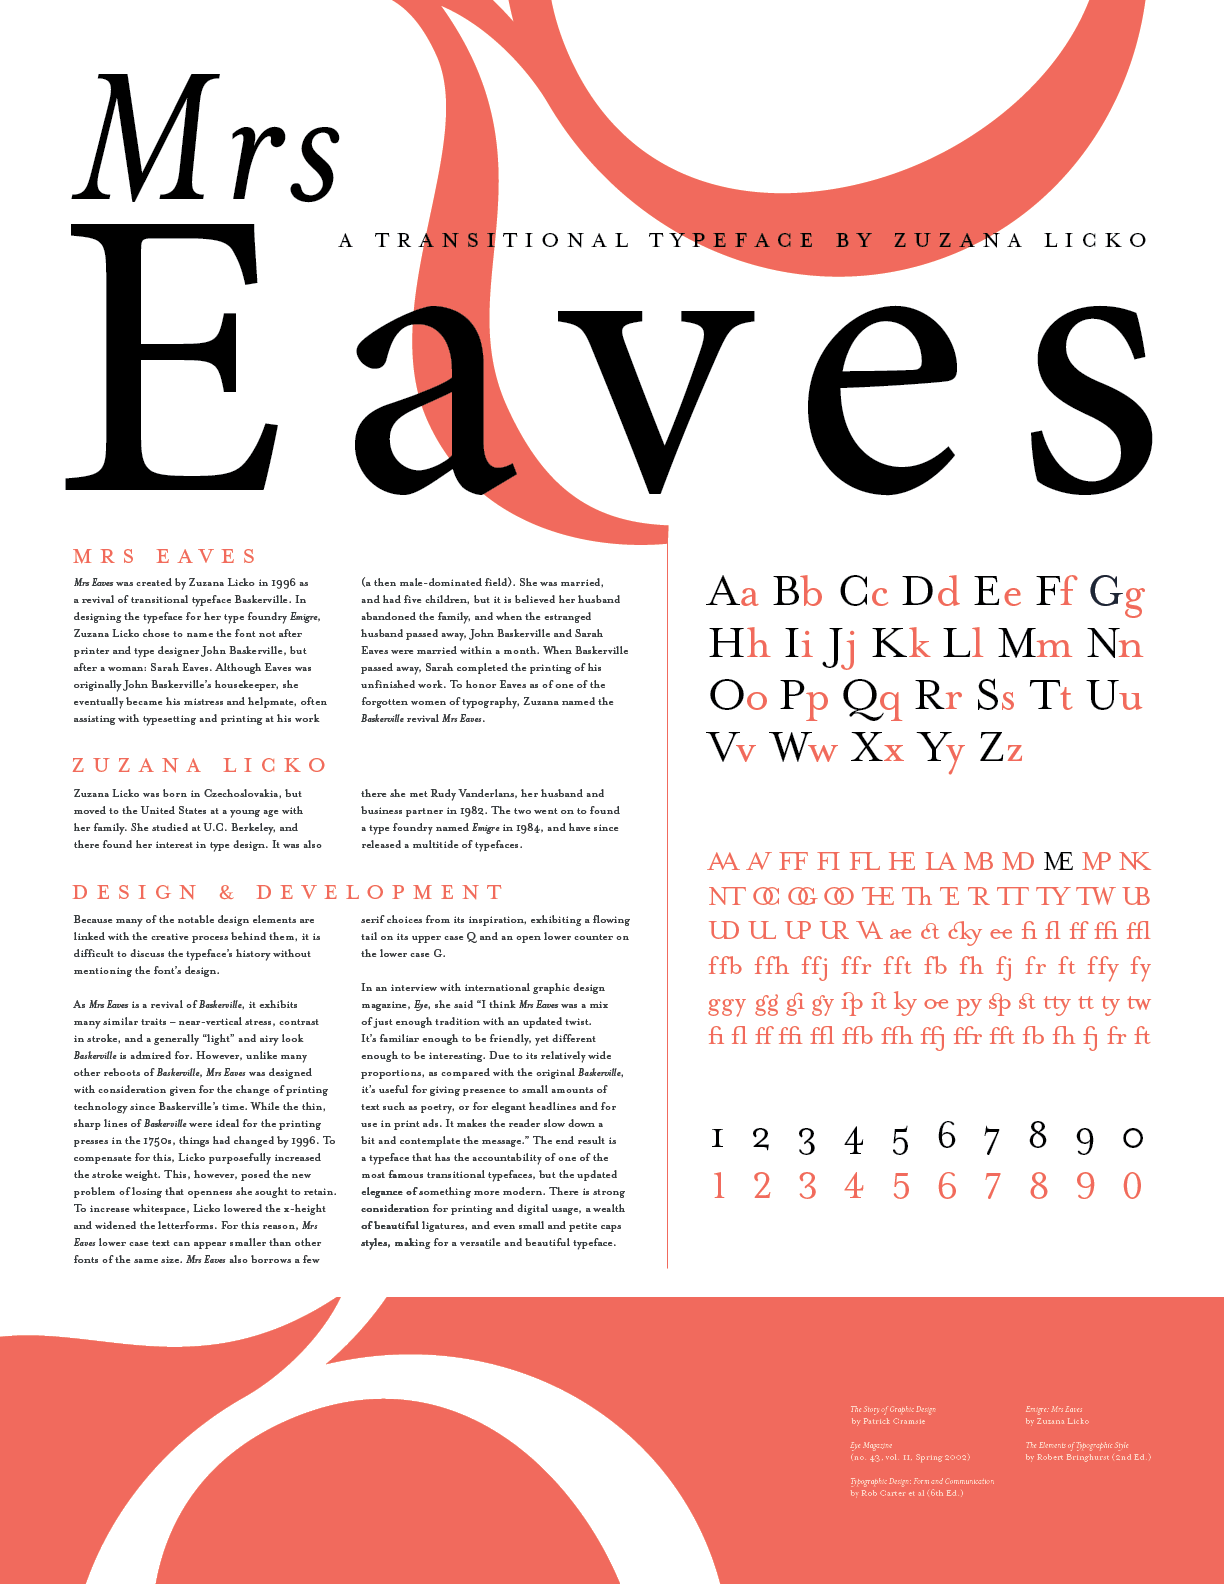 front (informational) side of the Mrs Eaves poster